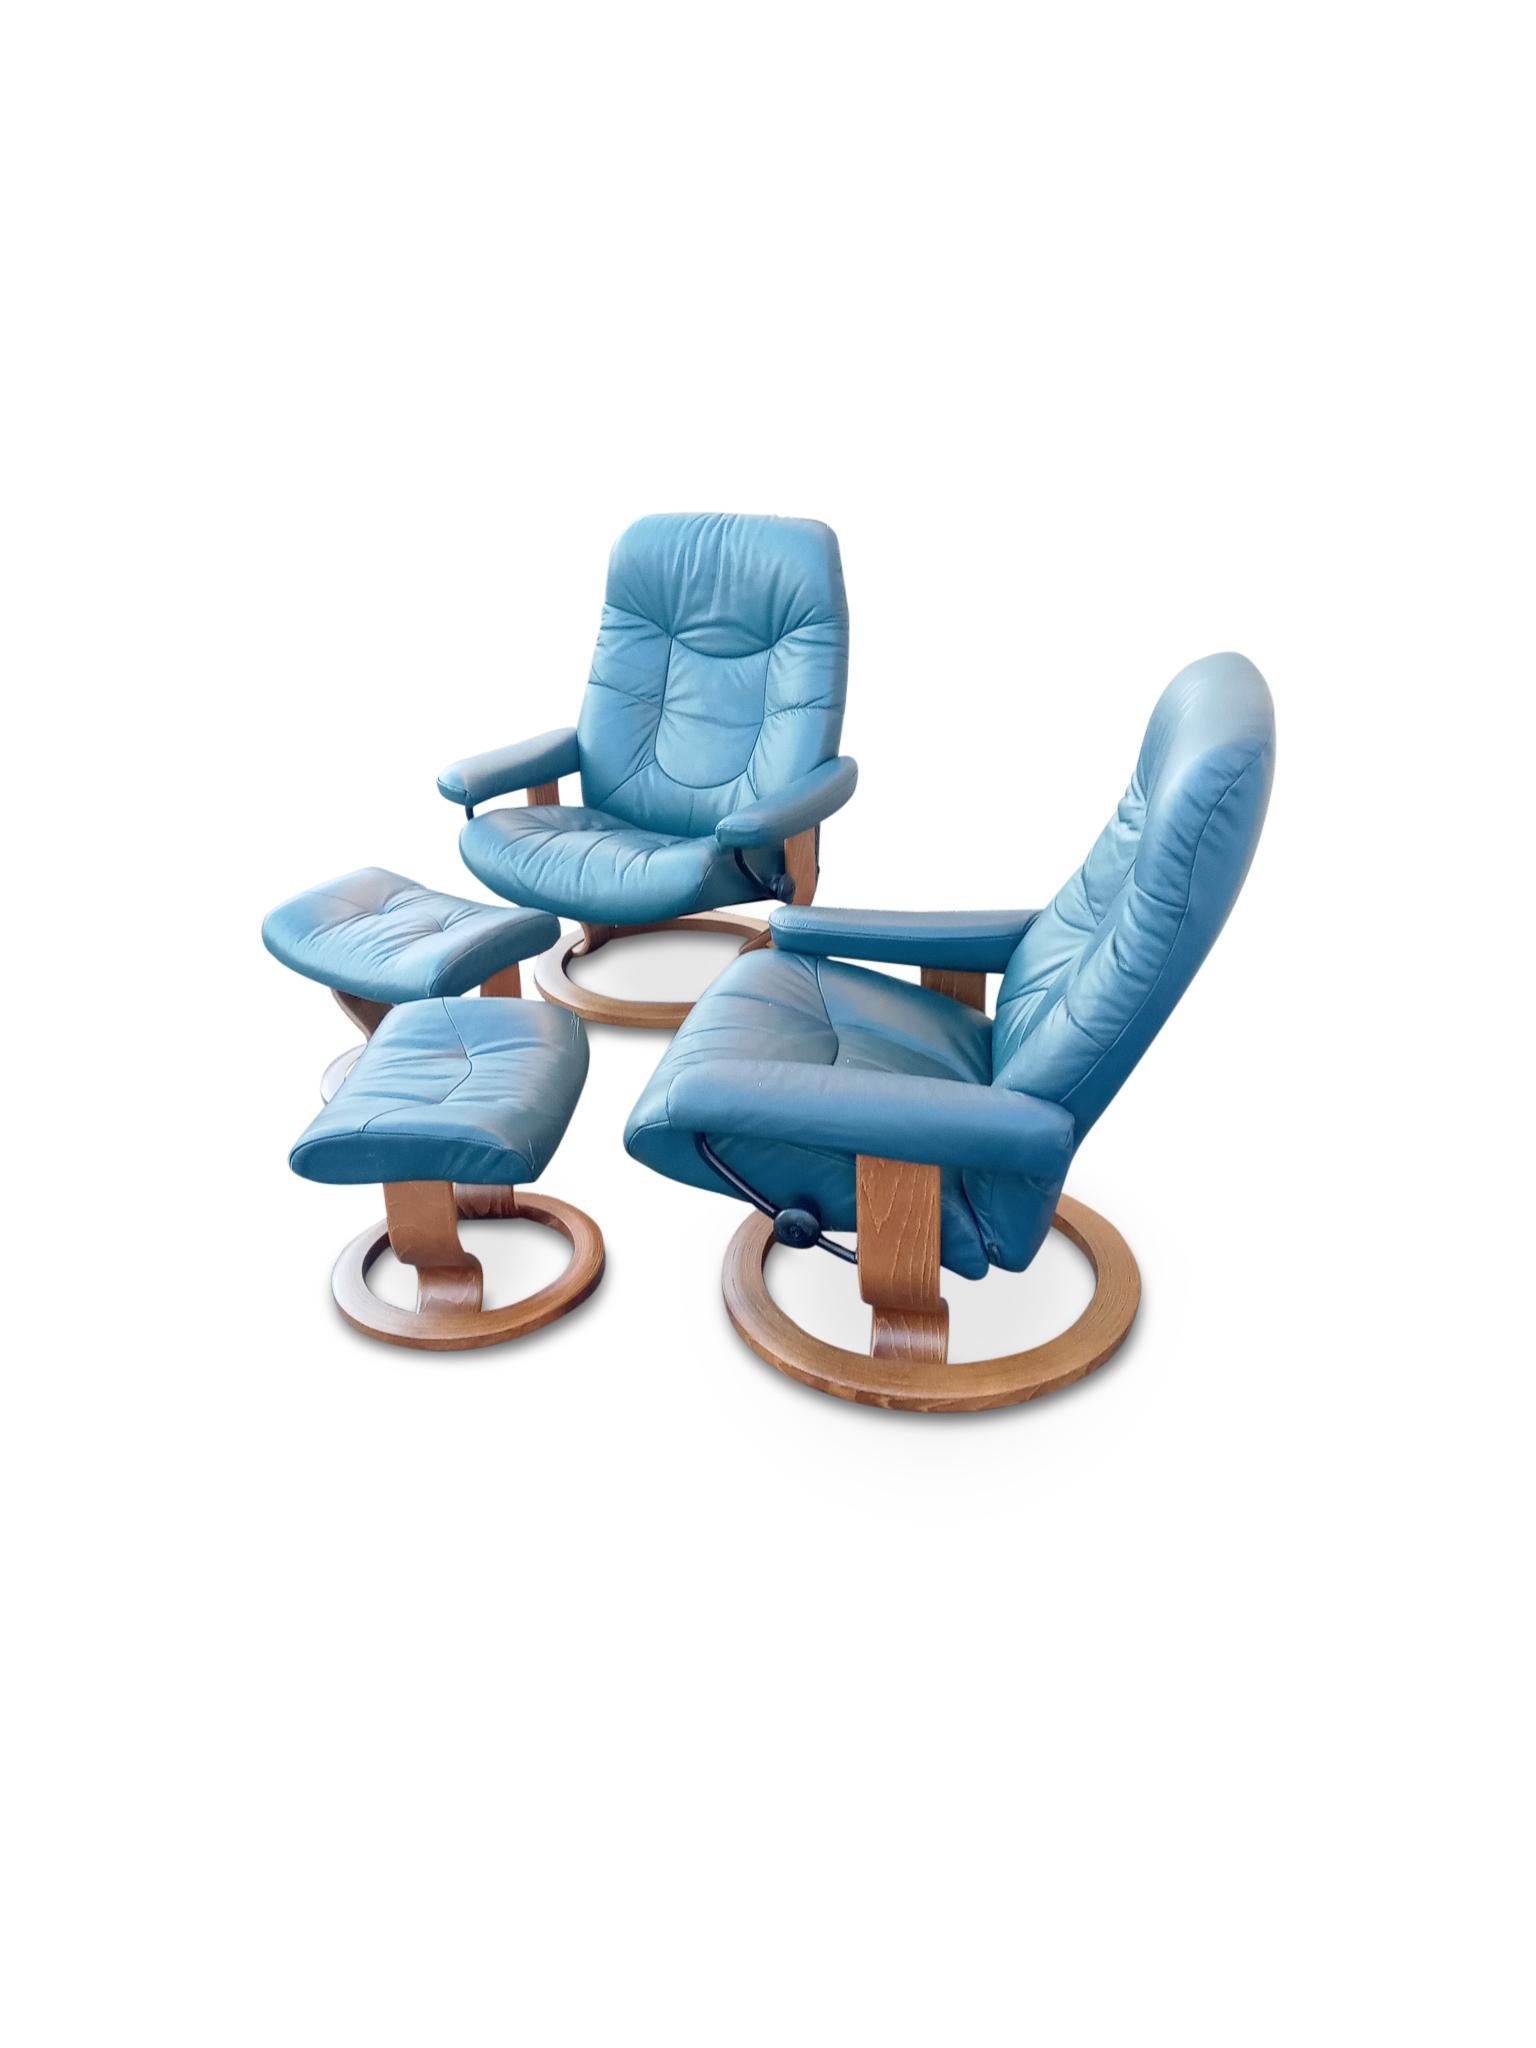 teal leather recliners